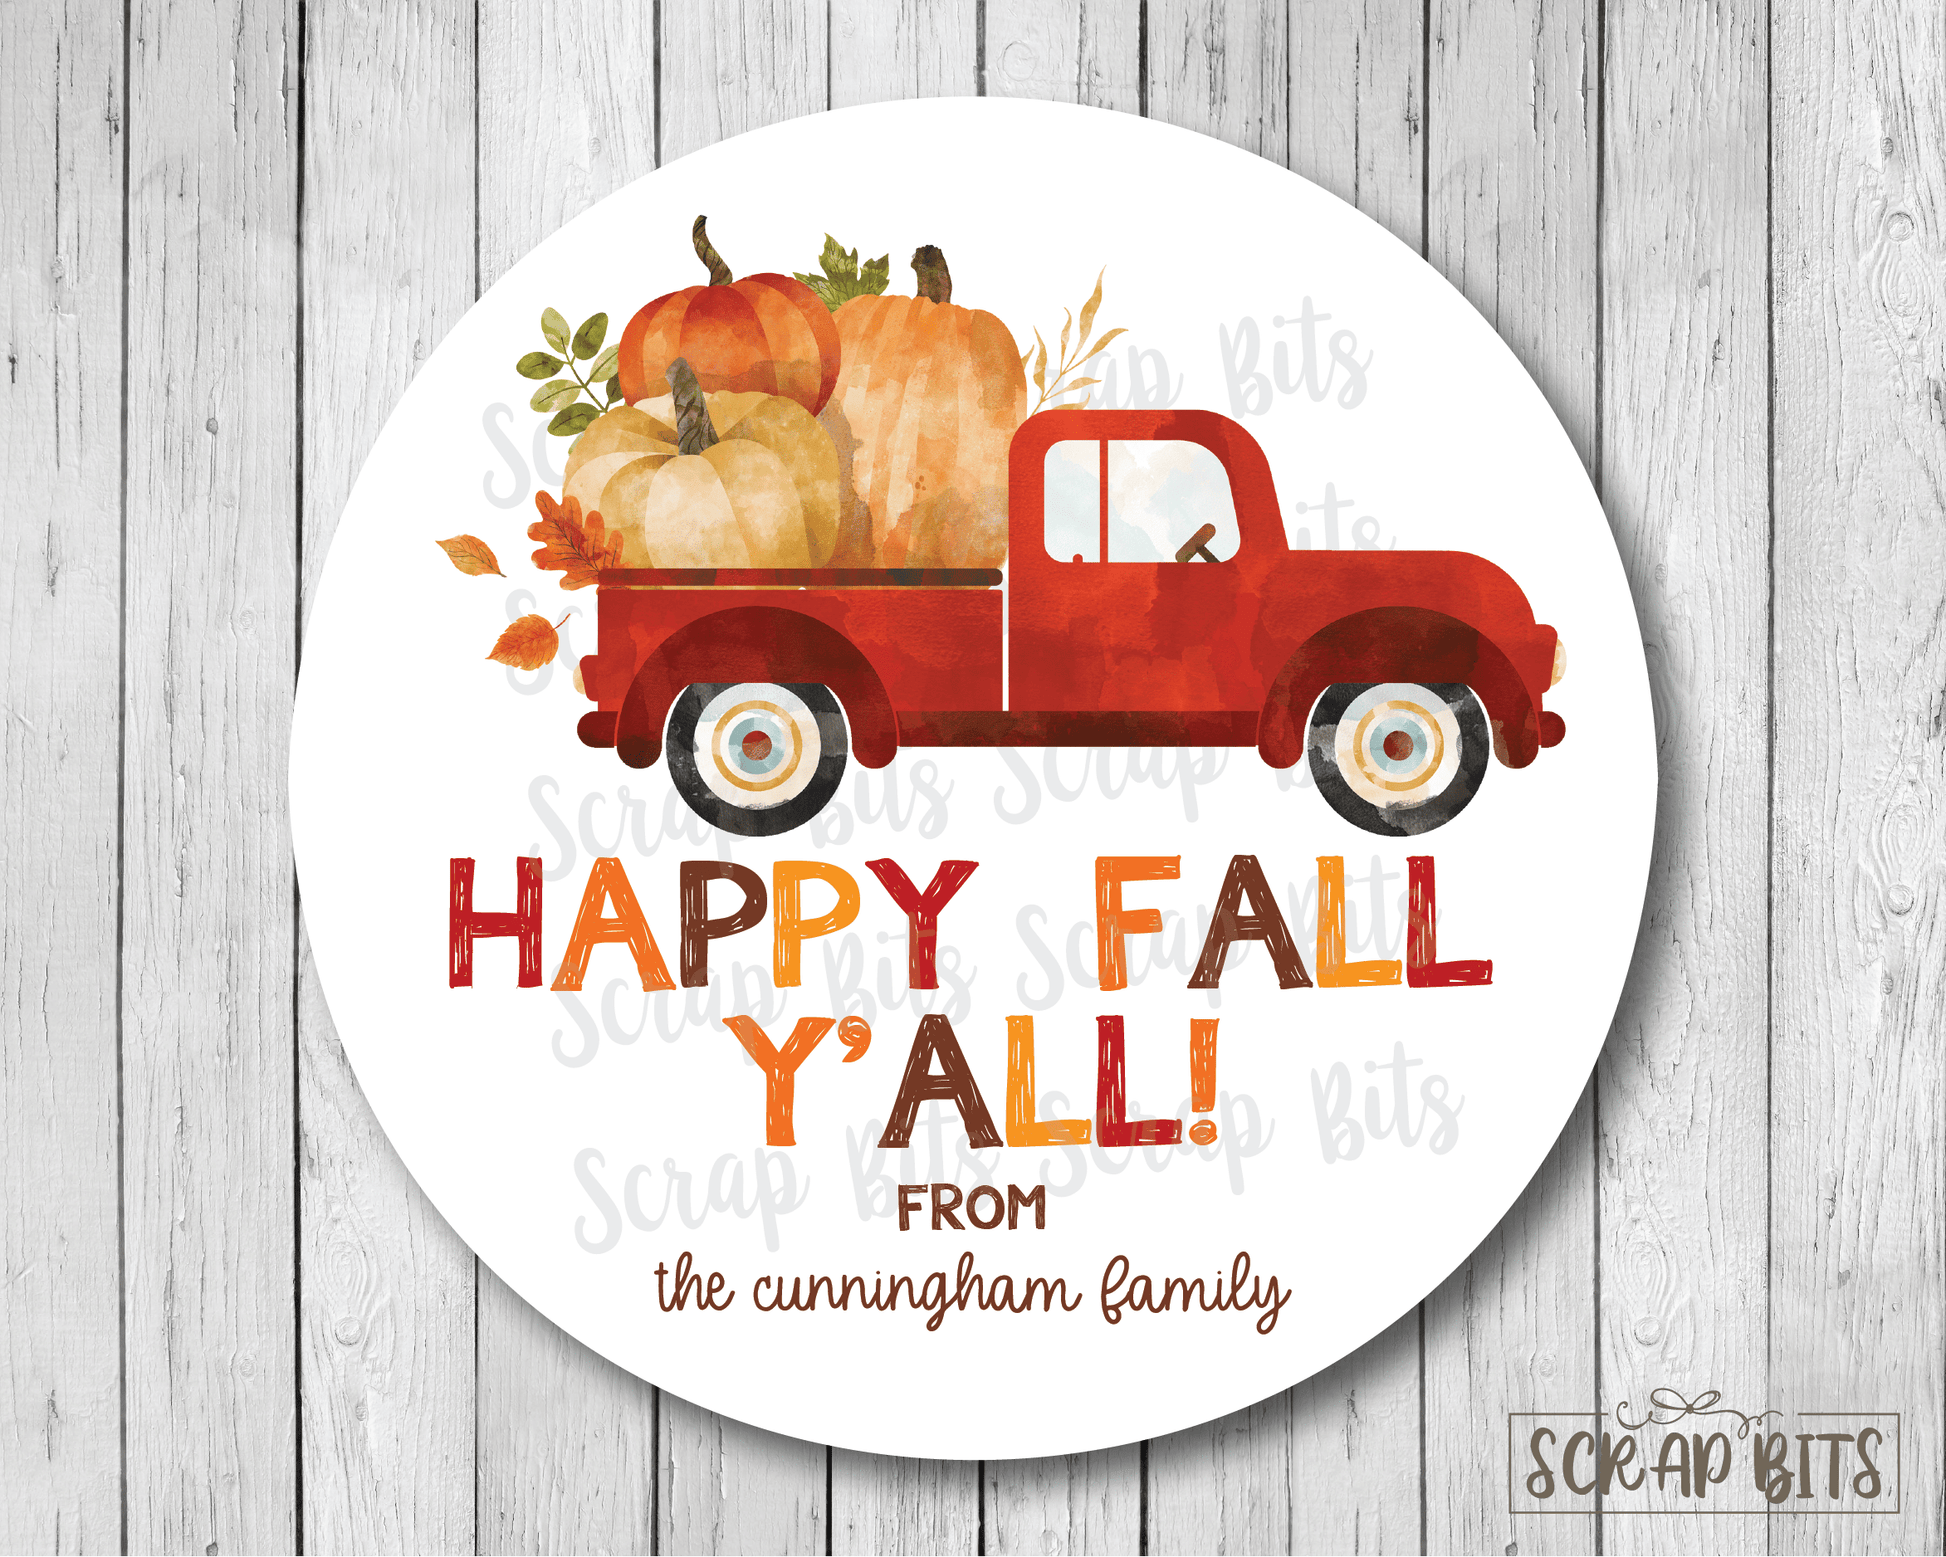 Happy Fall Y'All Red Pumpkin Truck Stickers or Tags - Scrap Bits